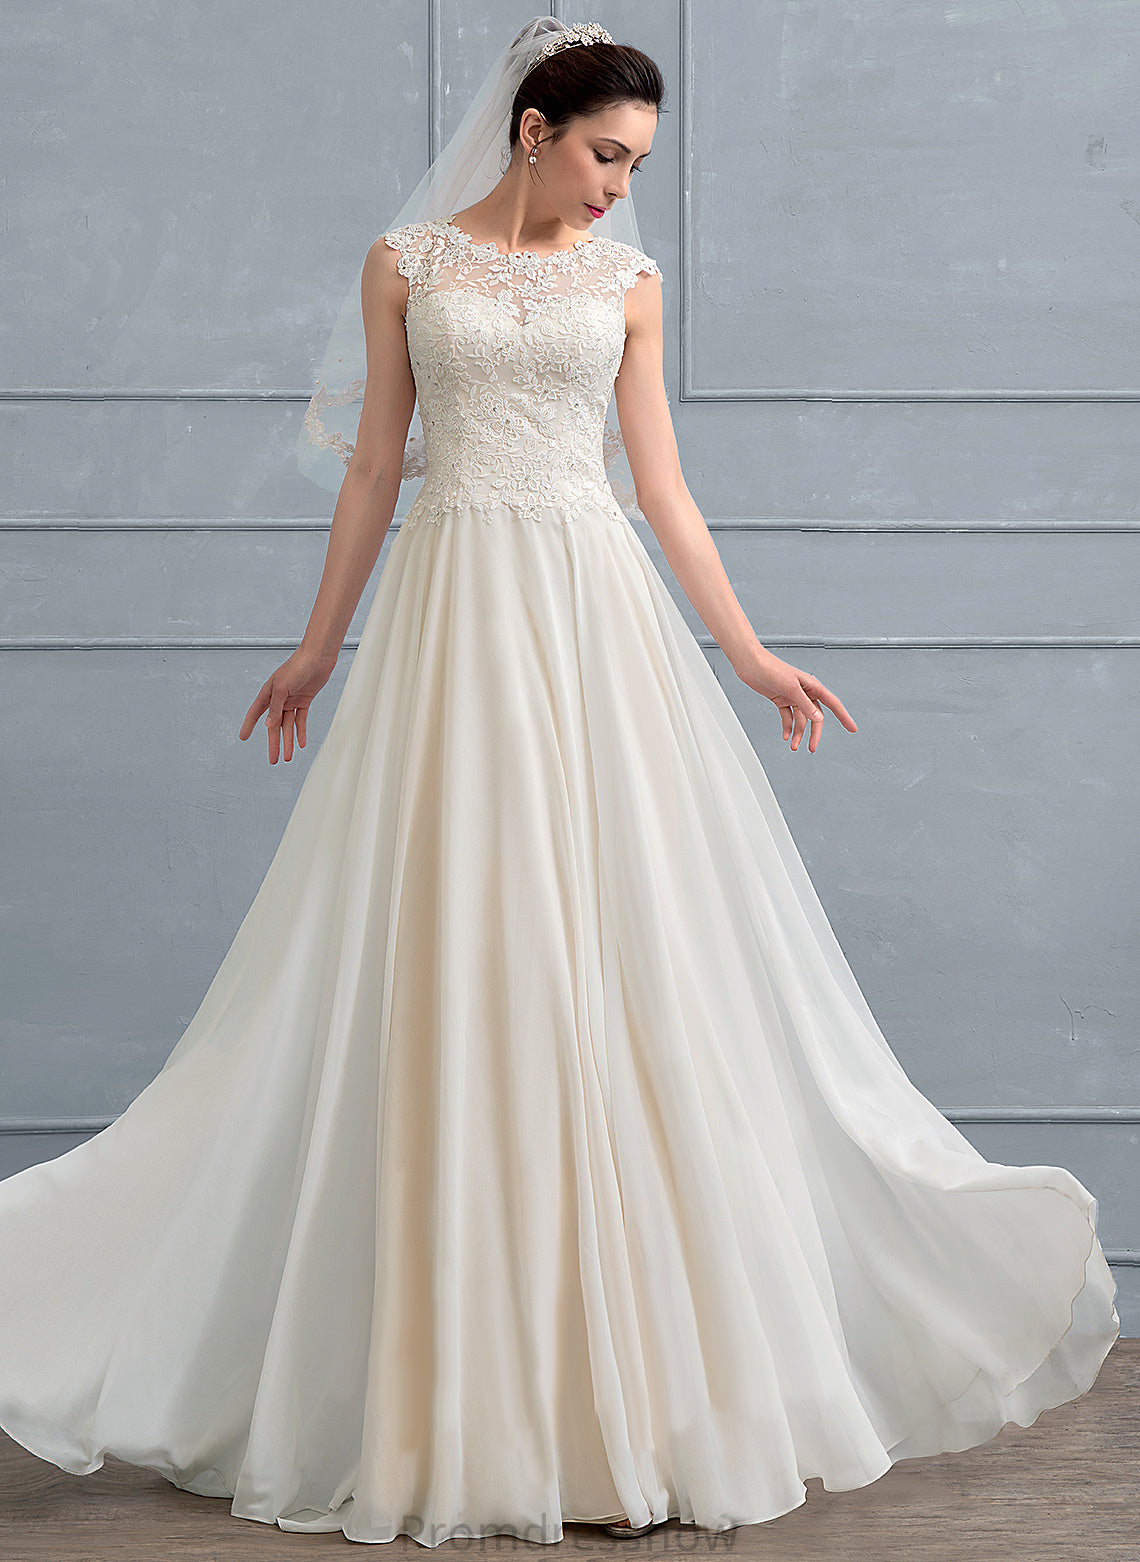 Scoop Wedding Floor-Length Dress Halle Wedding Dresses Beading A-Line Sequins With Chiffon Lace